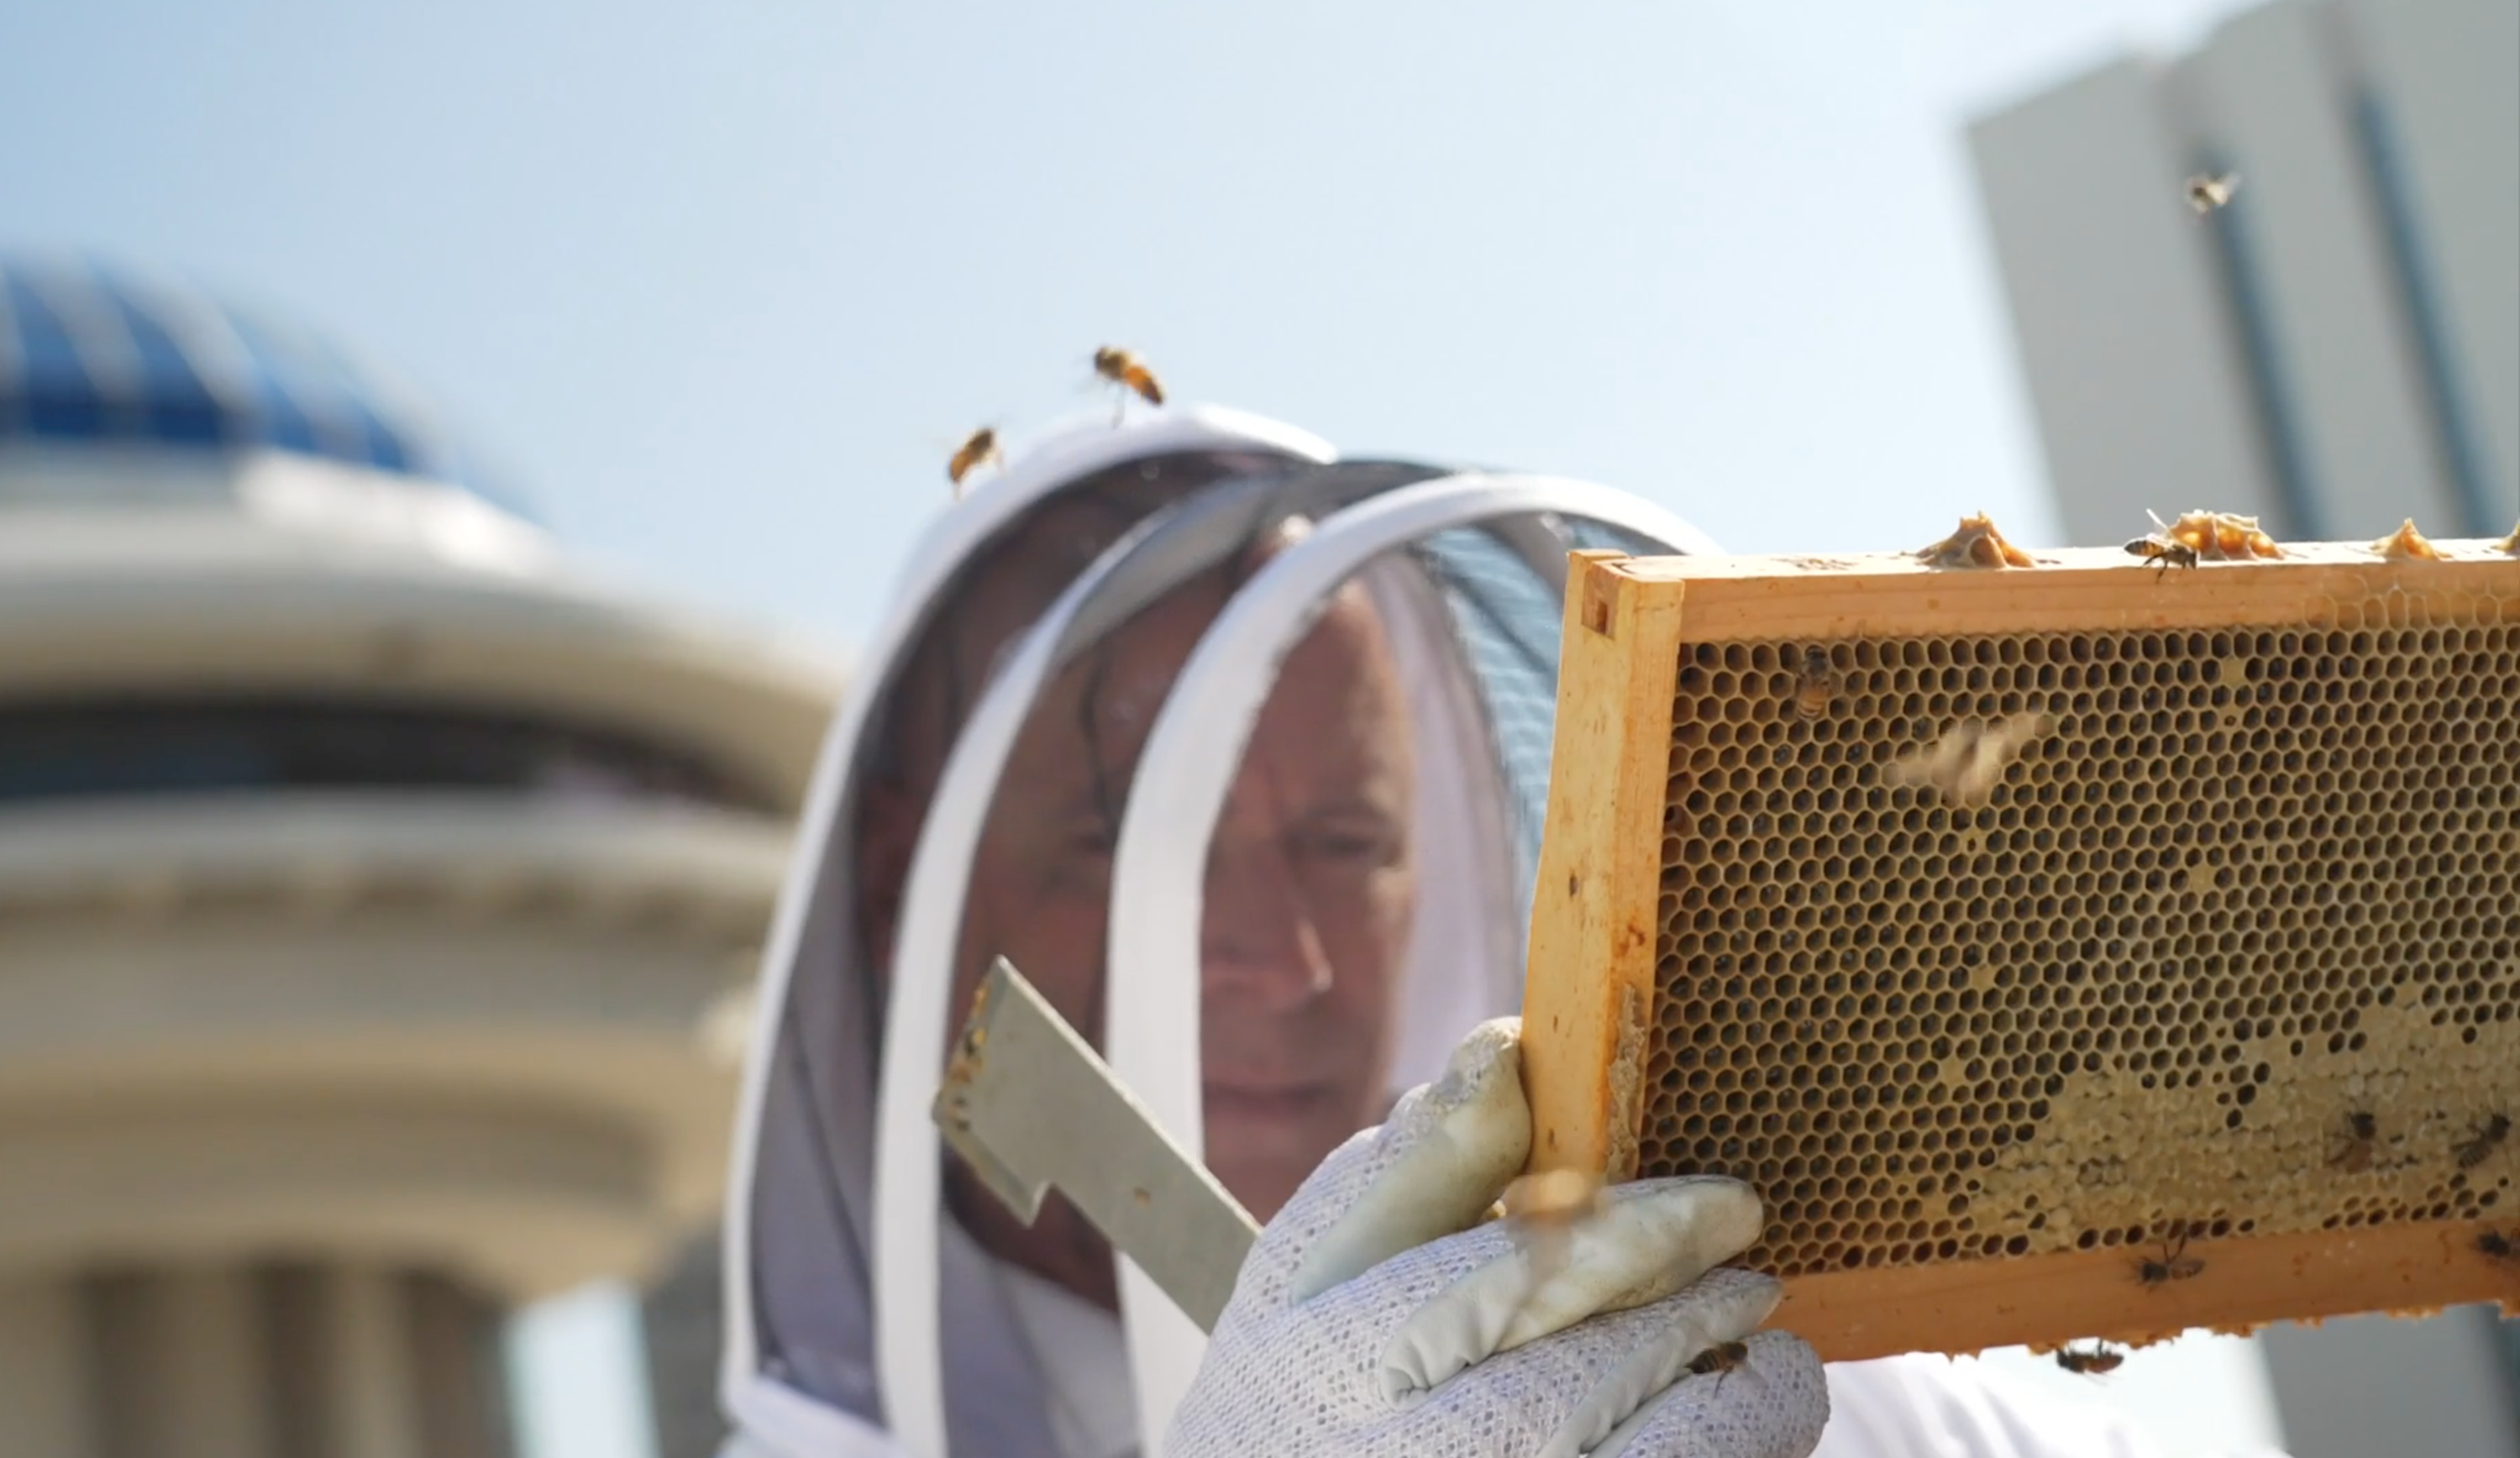 The Surprising Architecture in Bees' Honeycombs